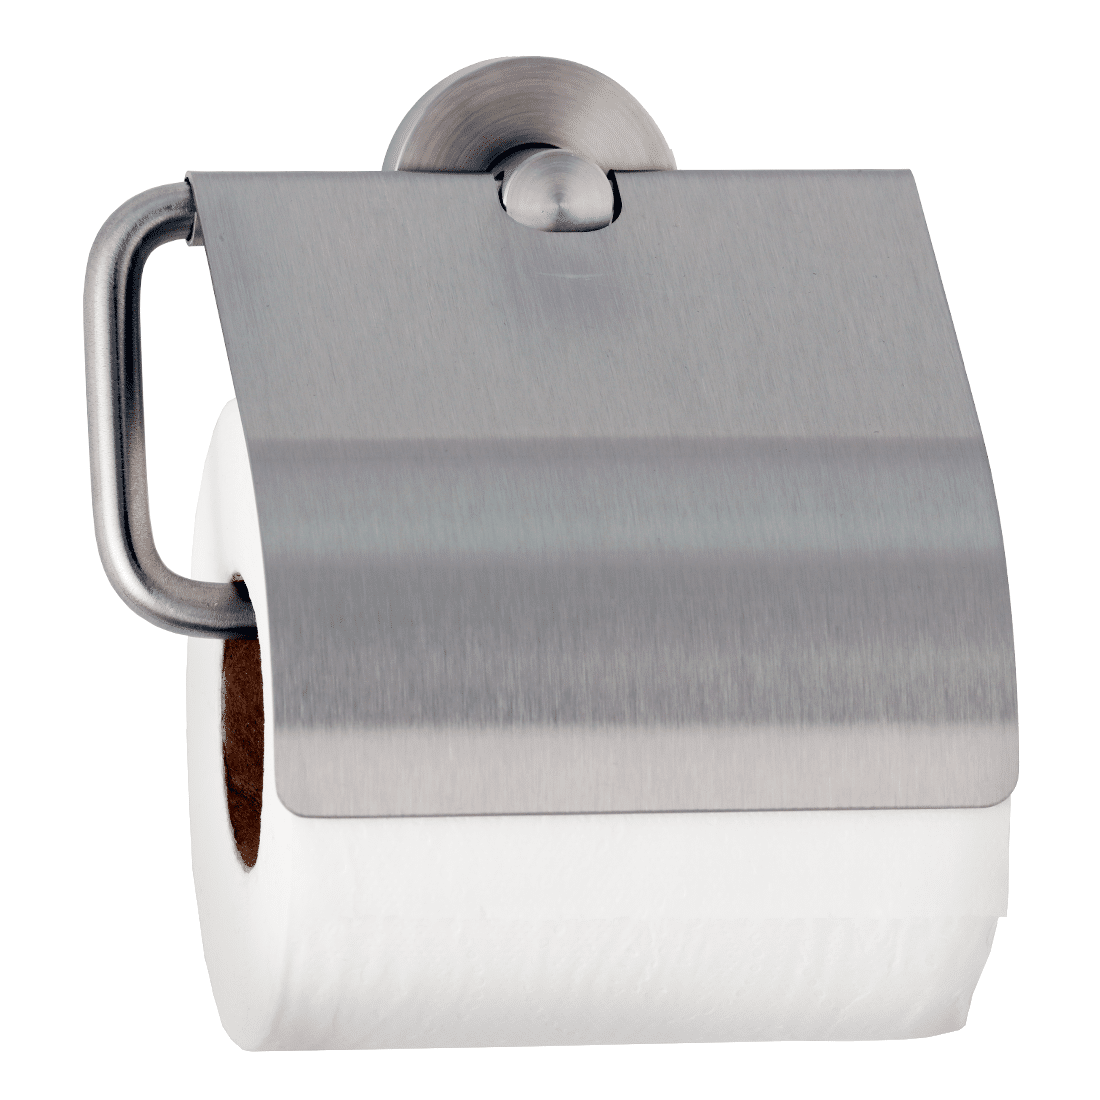 Bobrick Cubicle Coll. Toilet Tissue with Hood B-546 - Partition Plus